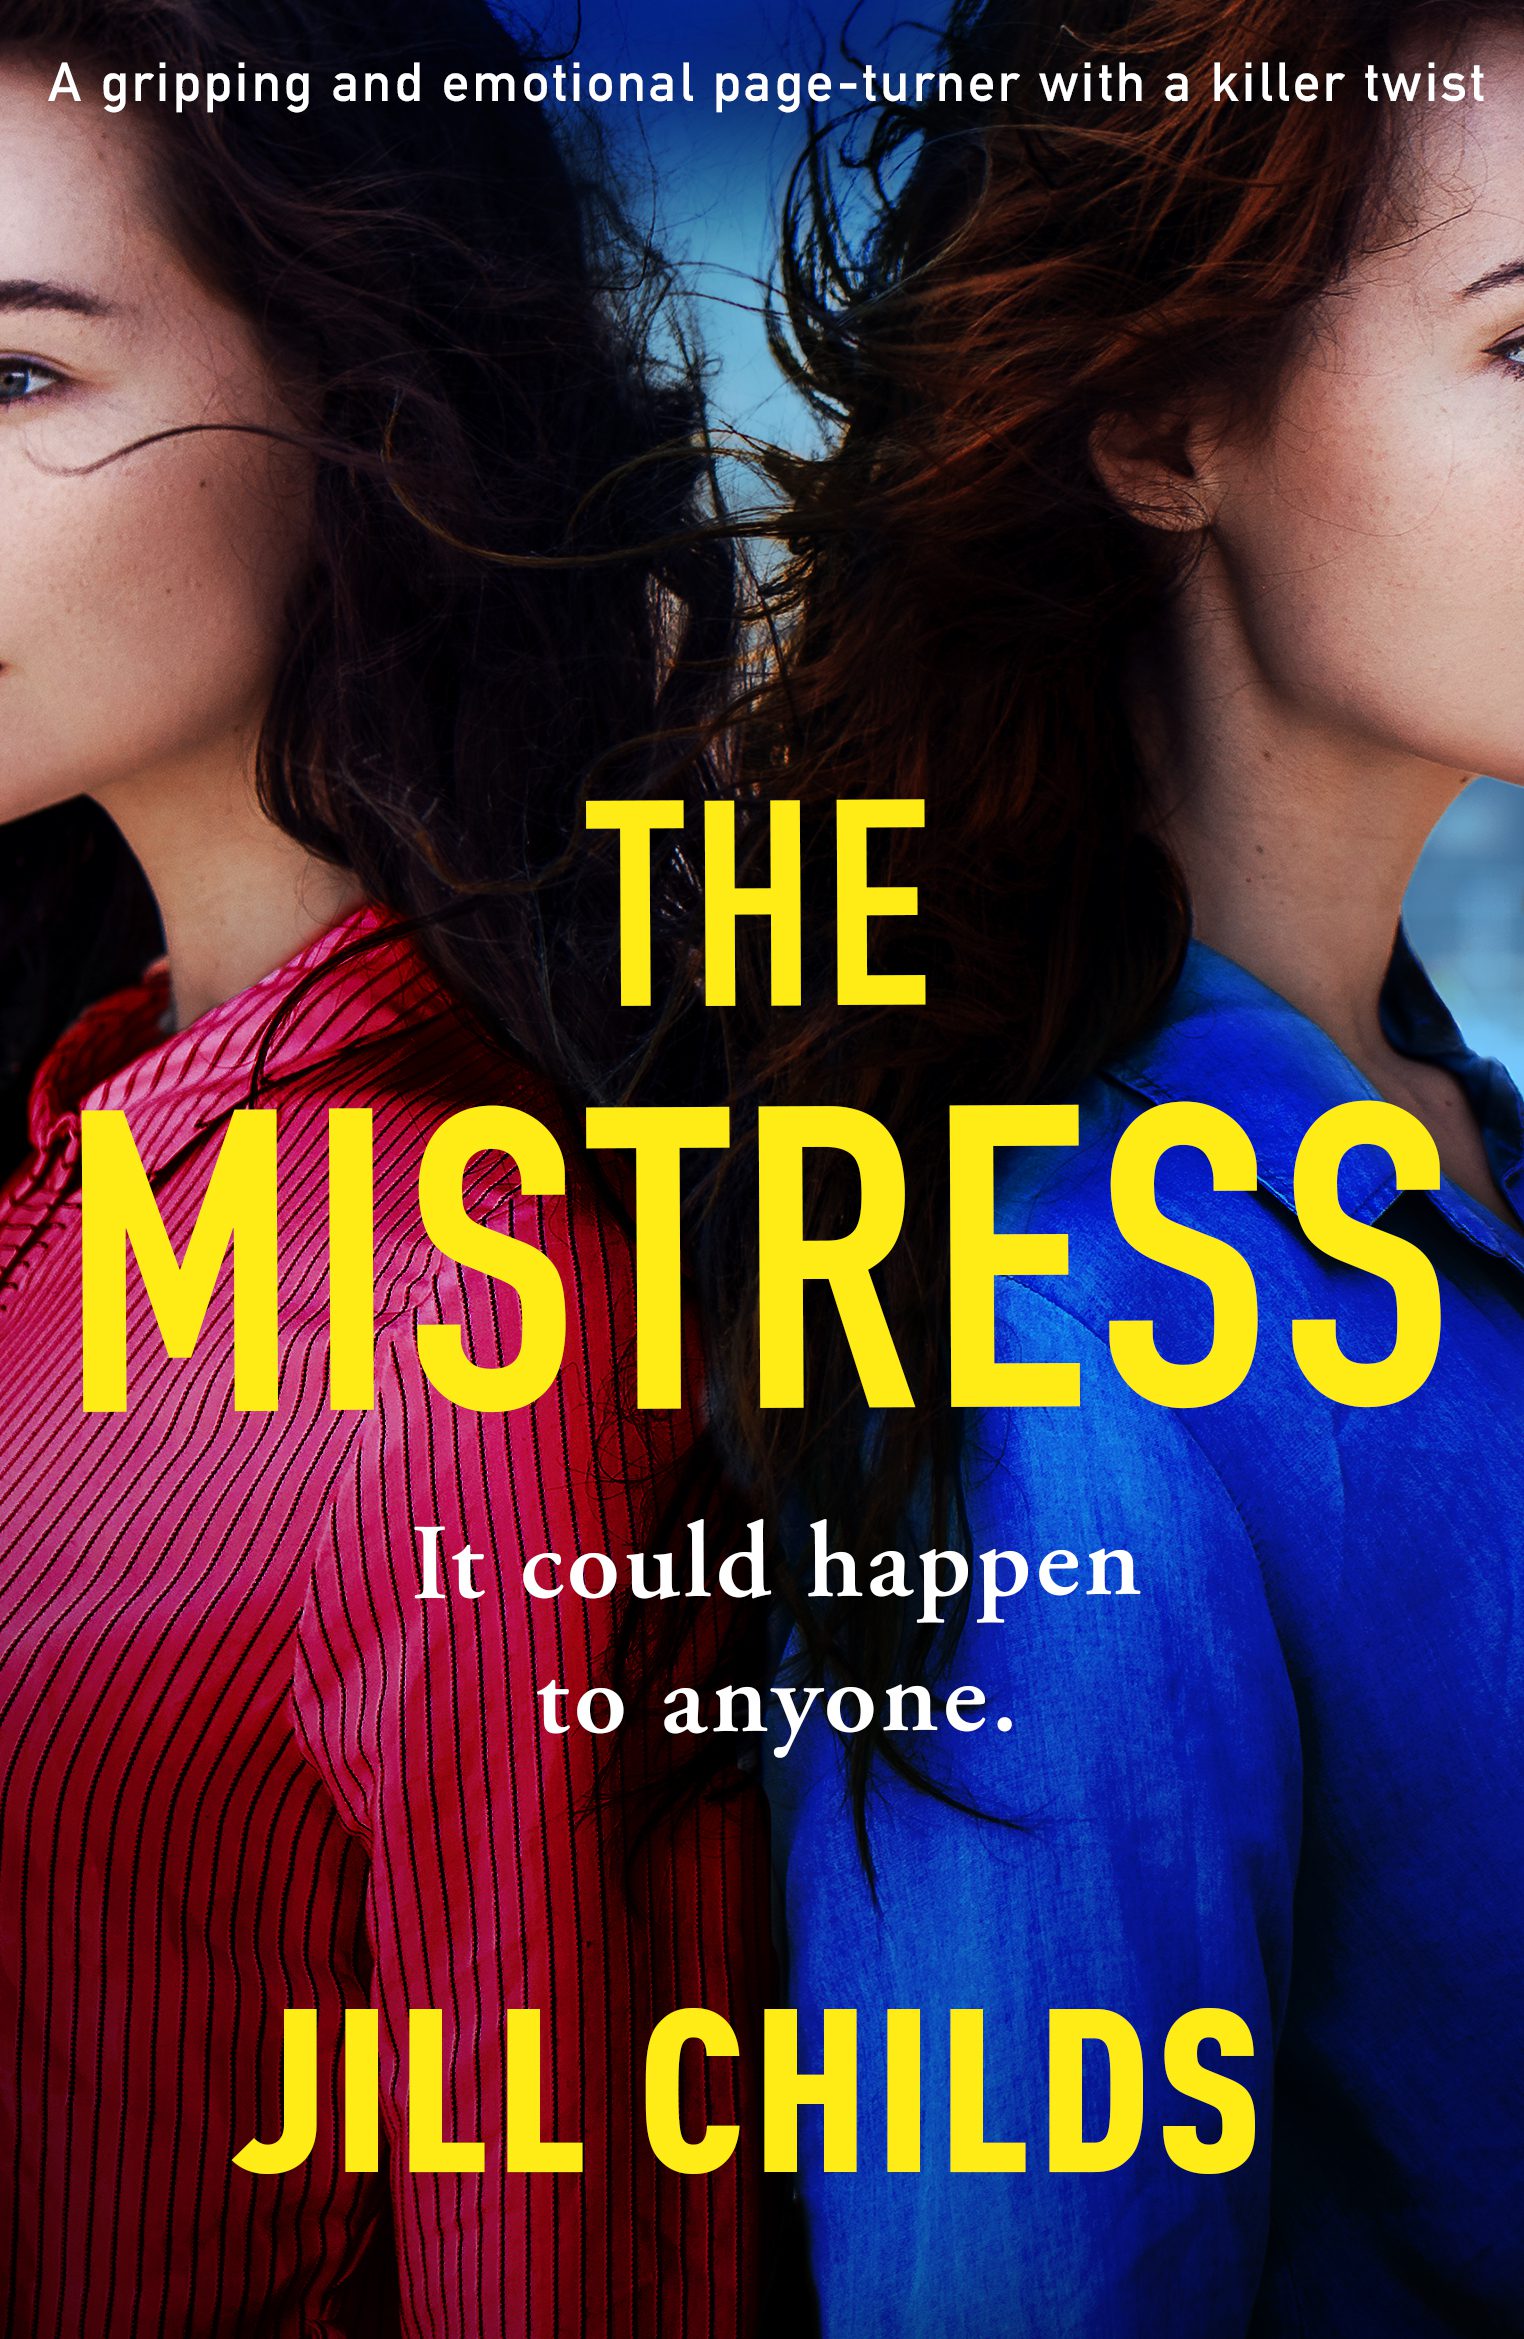 The Mistress book cover